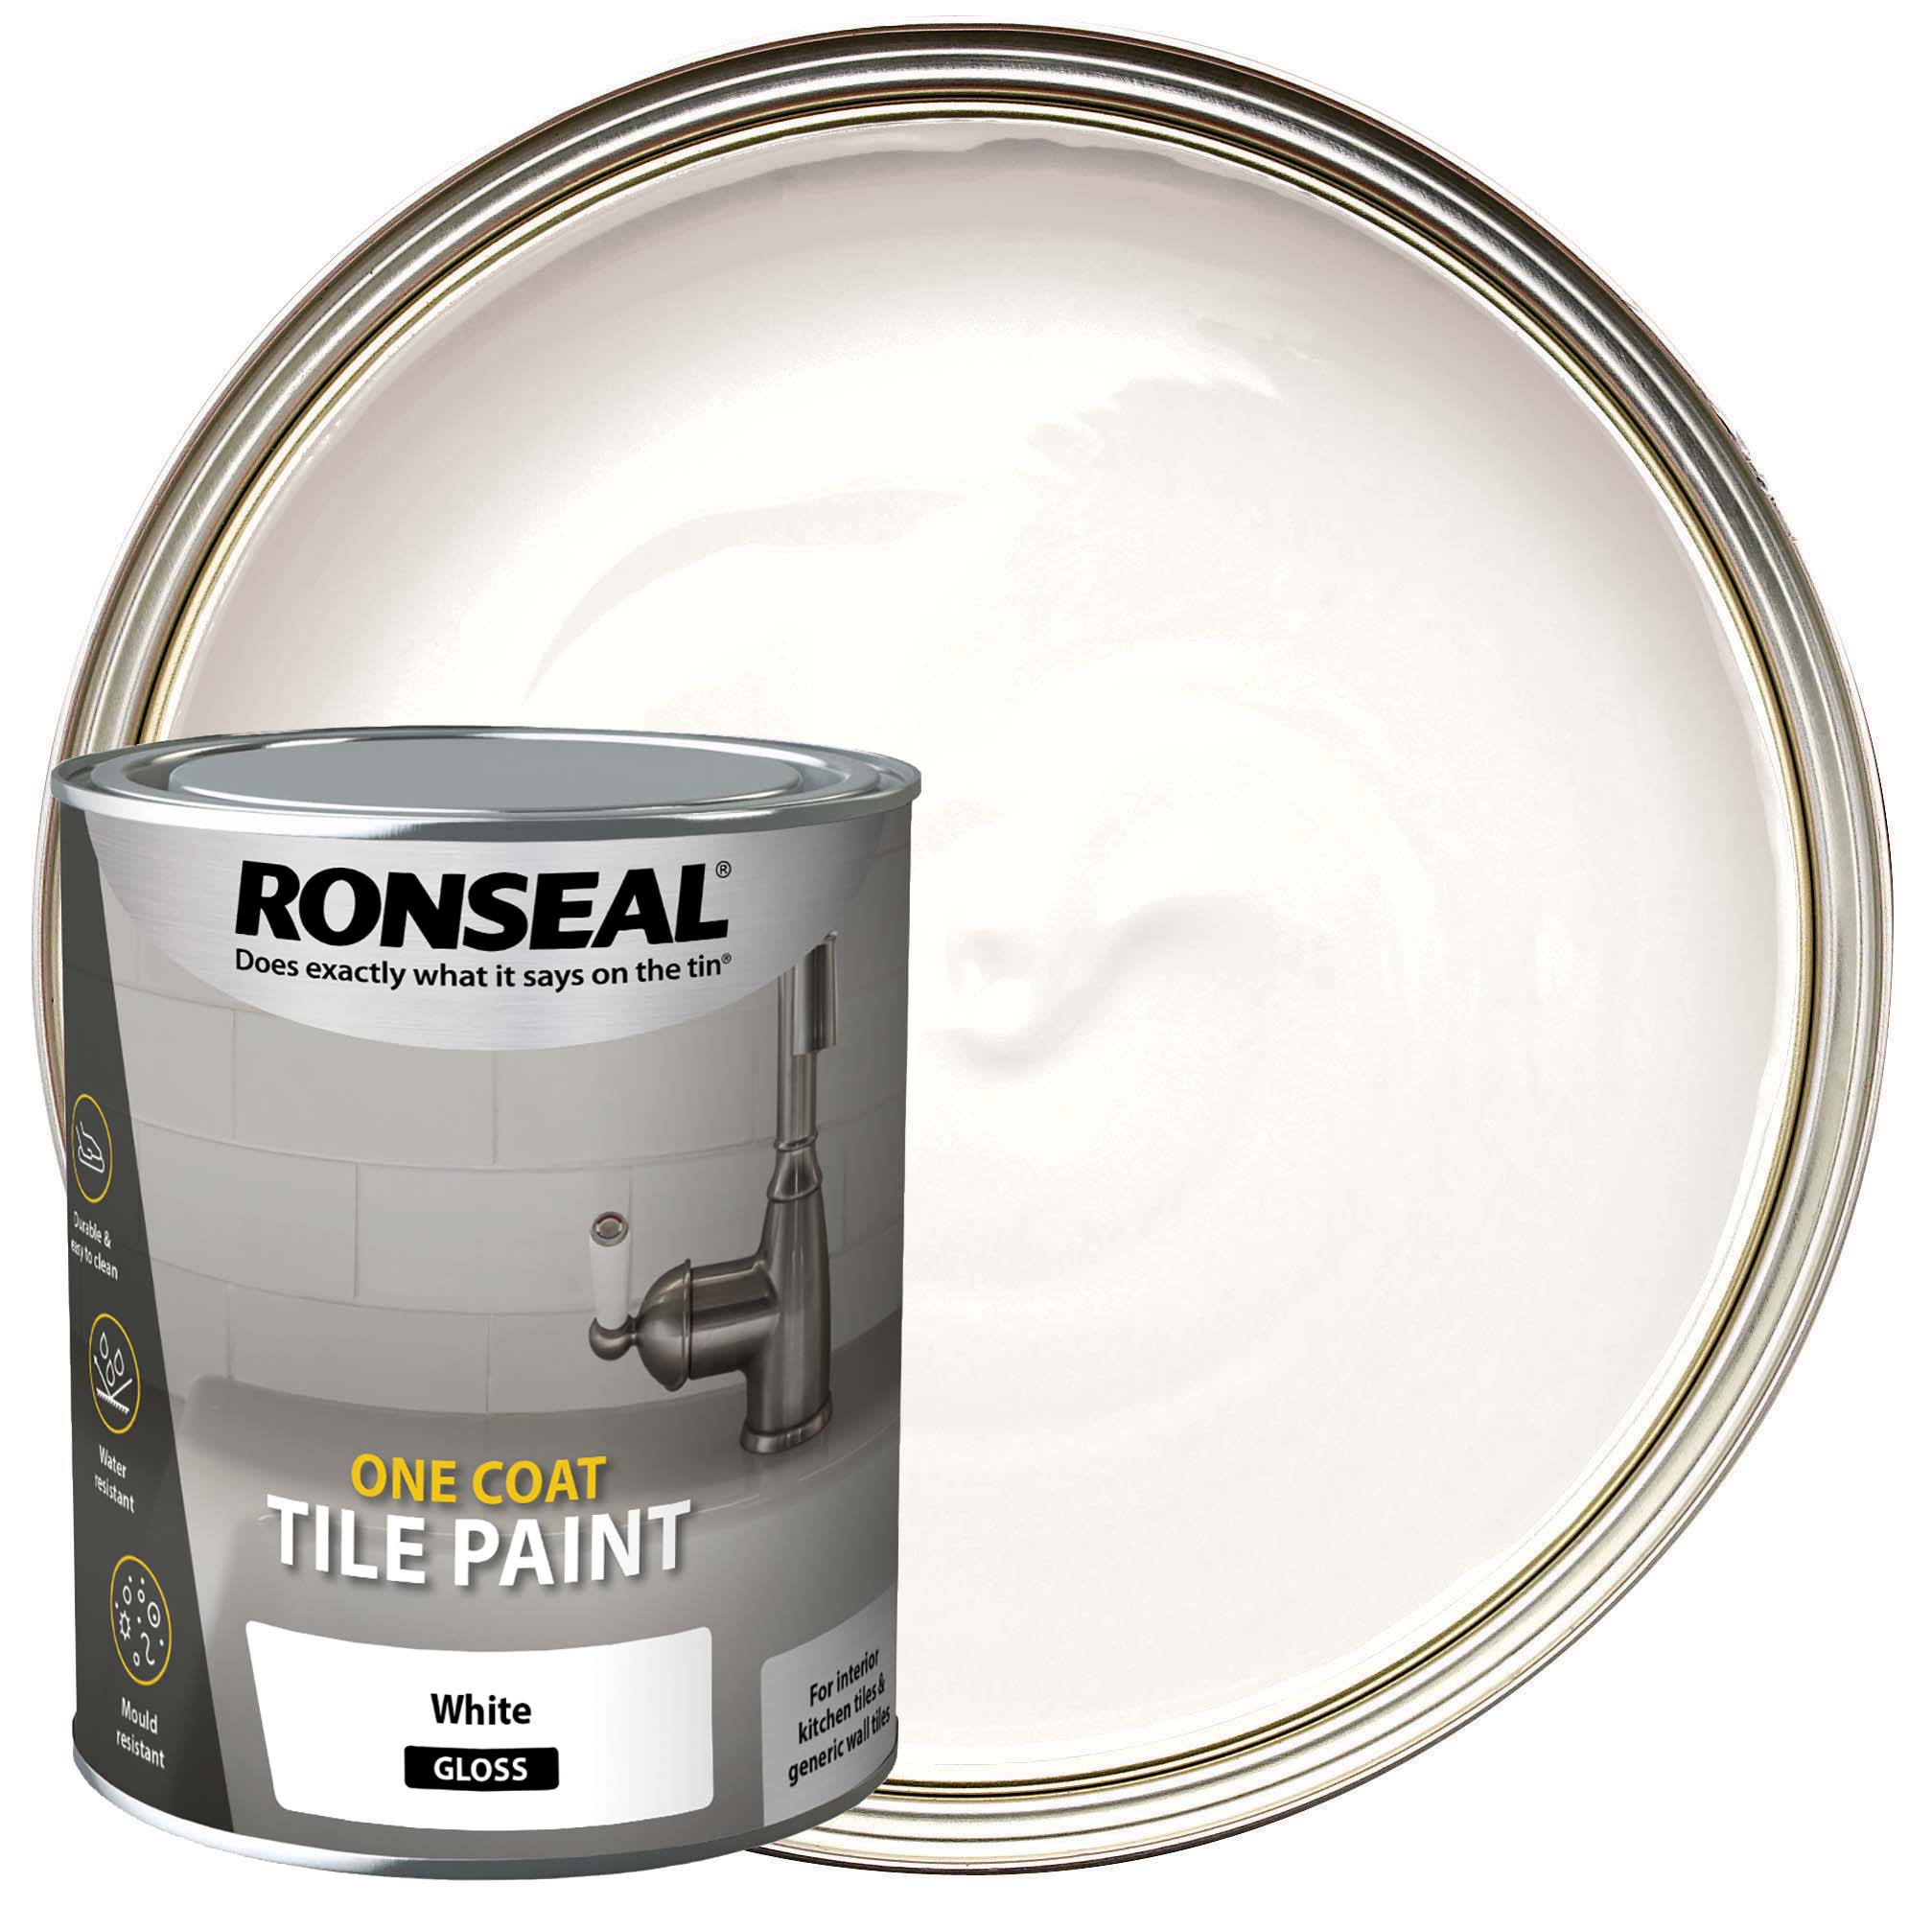 Image of Ronseal One Coat Tile Paint - Gloss White 750ml